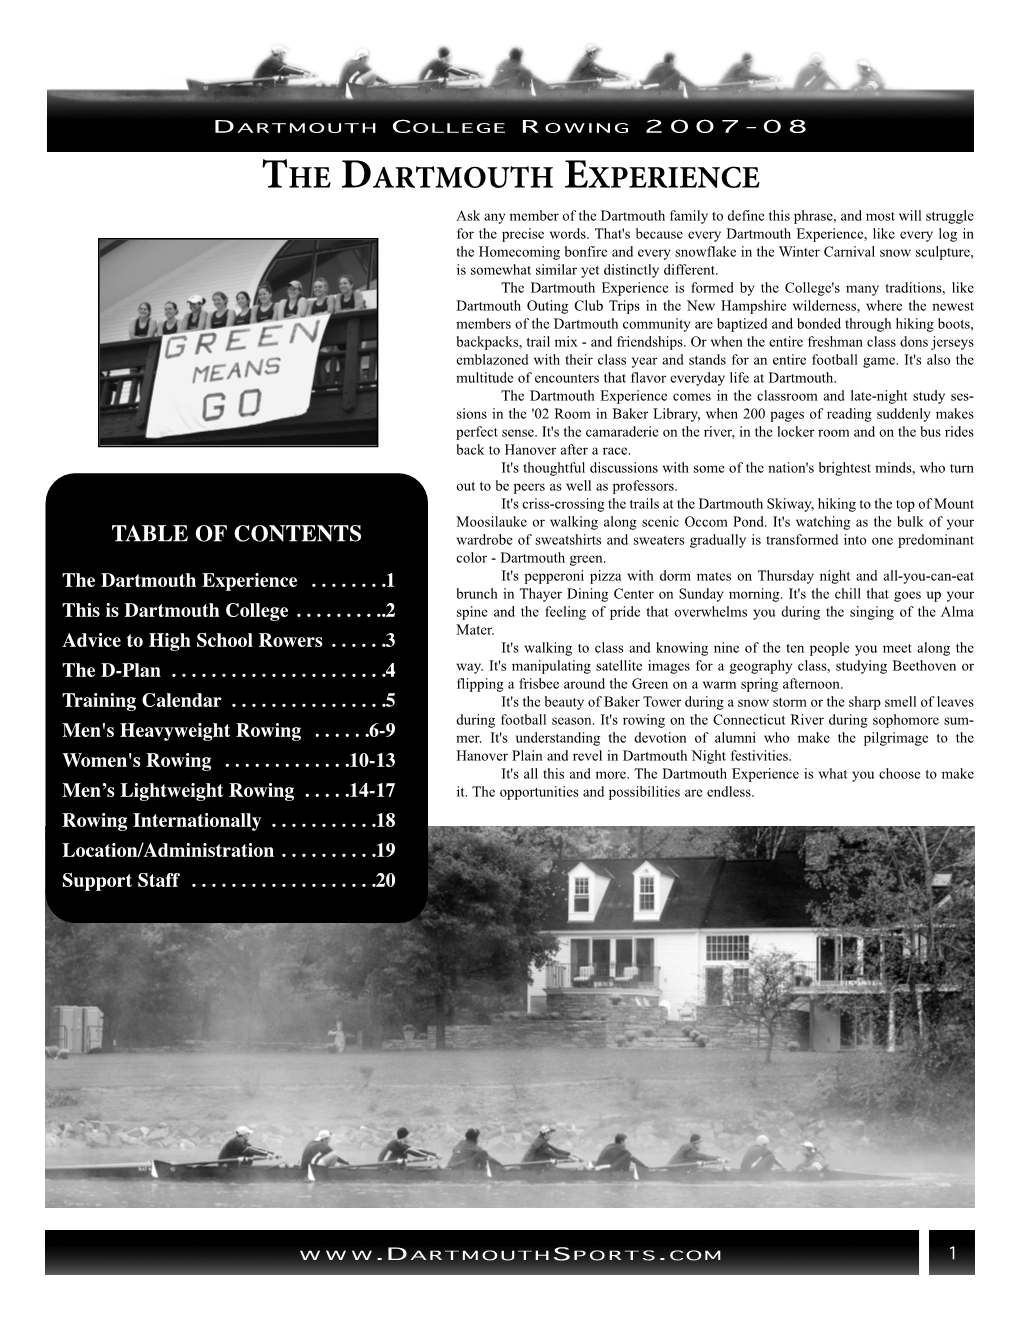 THE DARTMOUTH EXPERIENCE Ask Any Member of the Dartmouth Family to Define This Phrase, and Most Will Struggle for the Precise Words